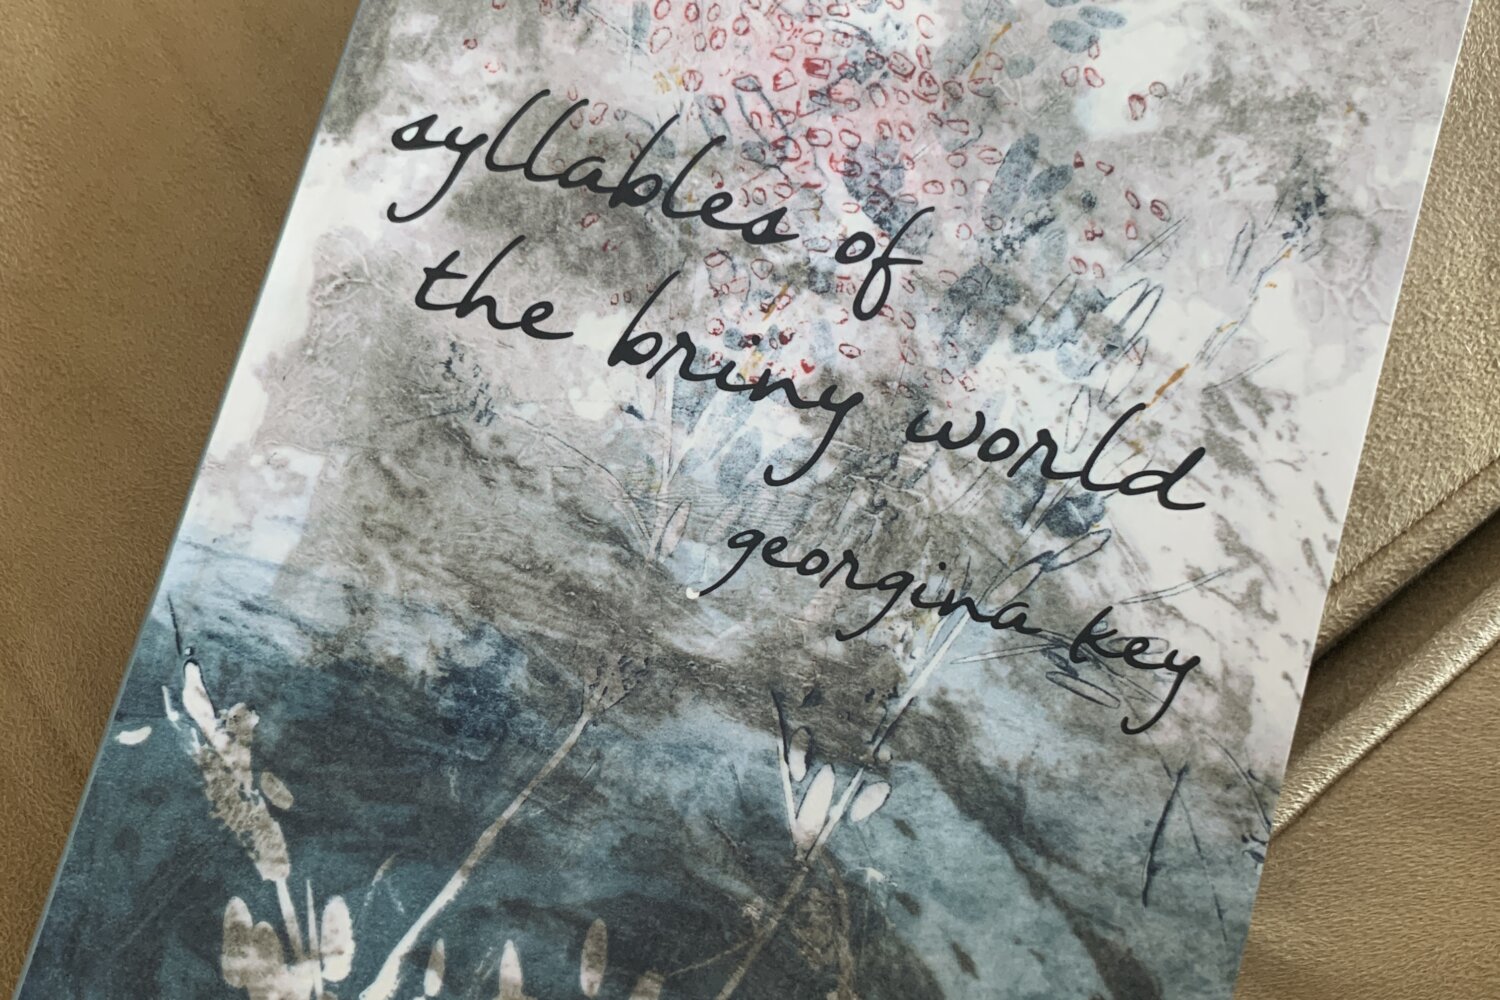 Syllables of the Briny World, a photo of a book